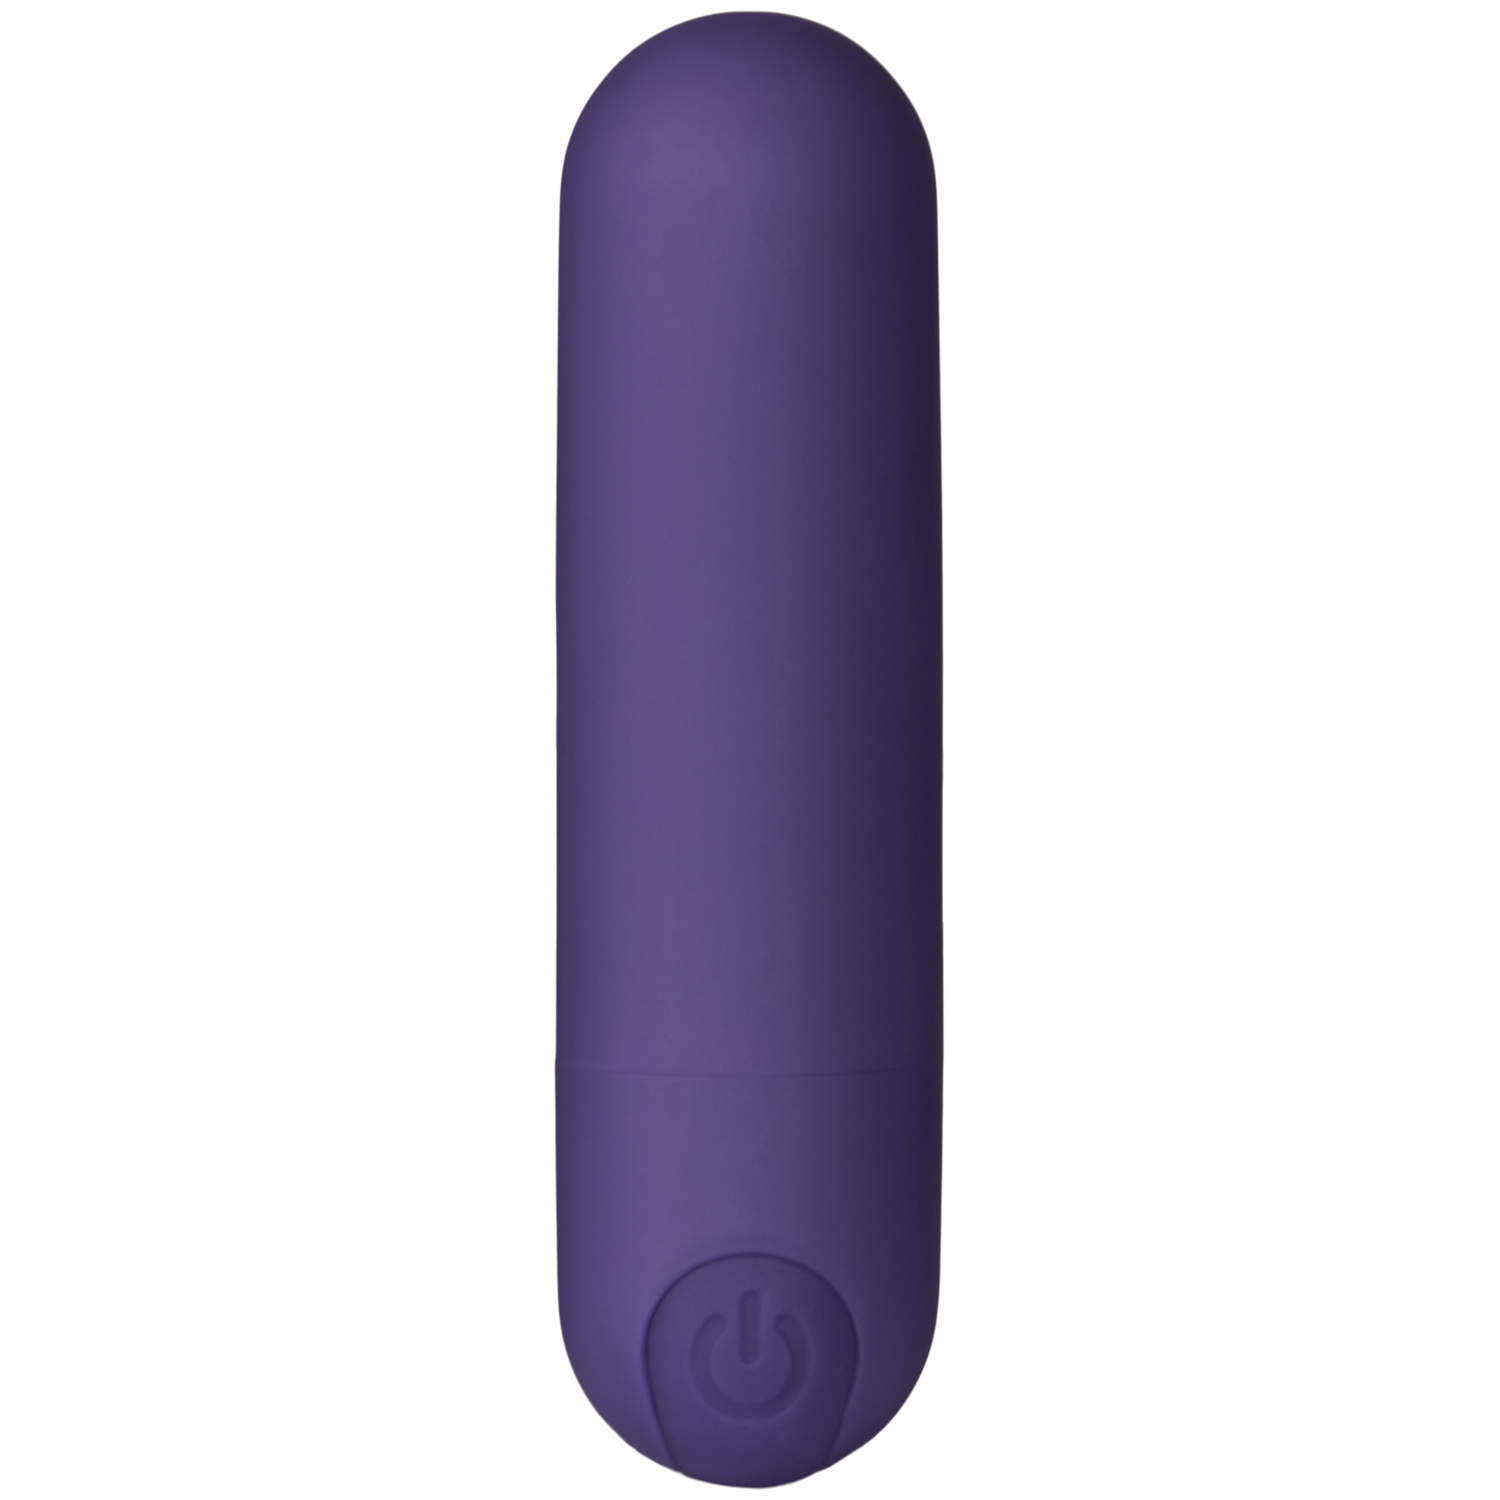 Sinful Passion Purple Opladelig Power Bullet Vibrator - Lilla